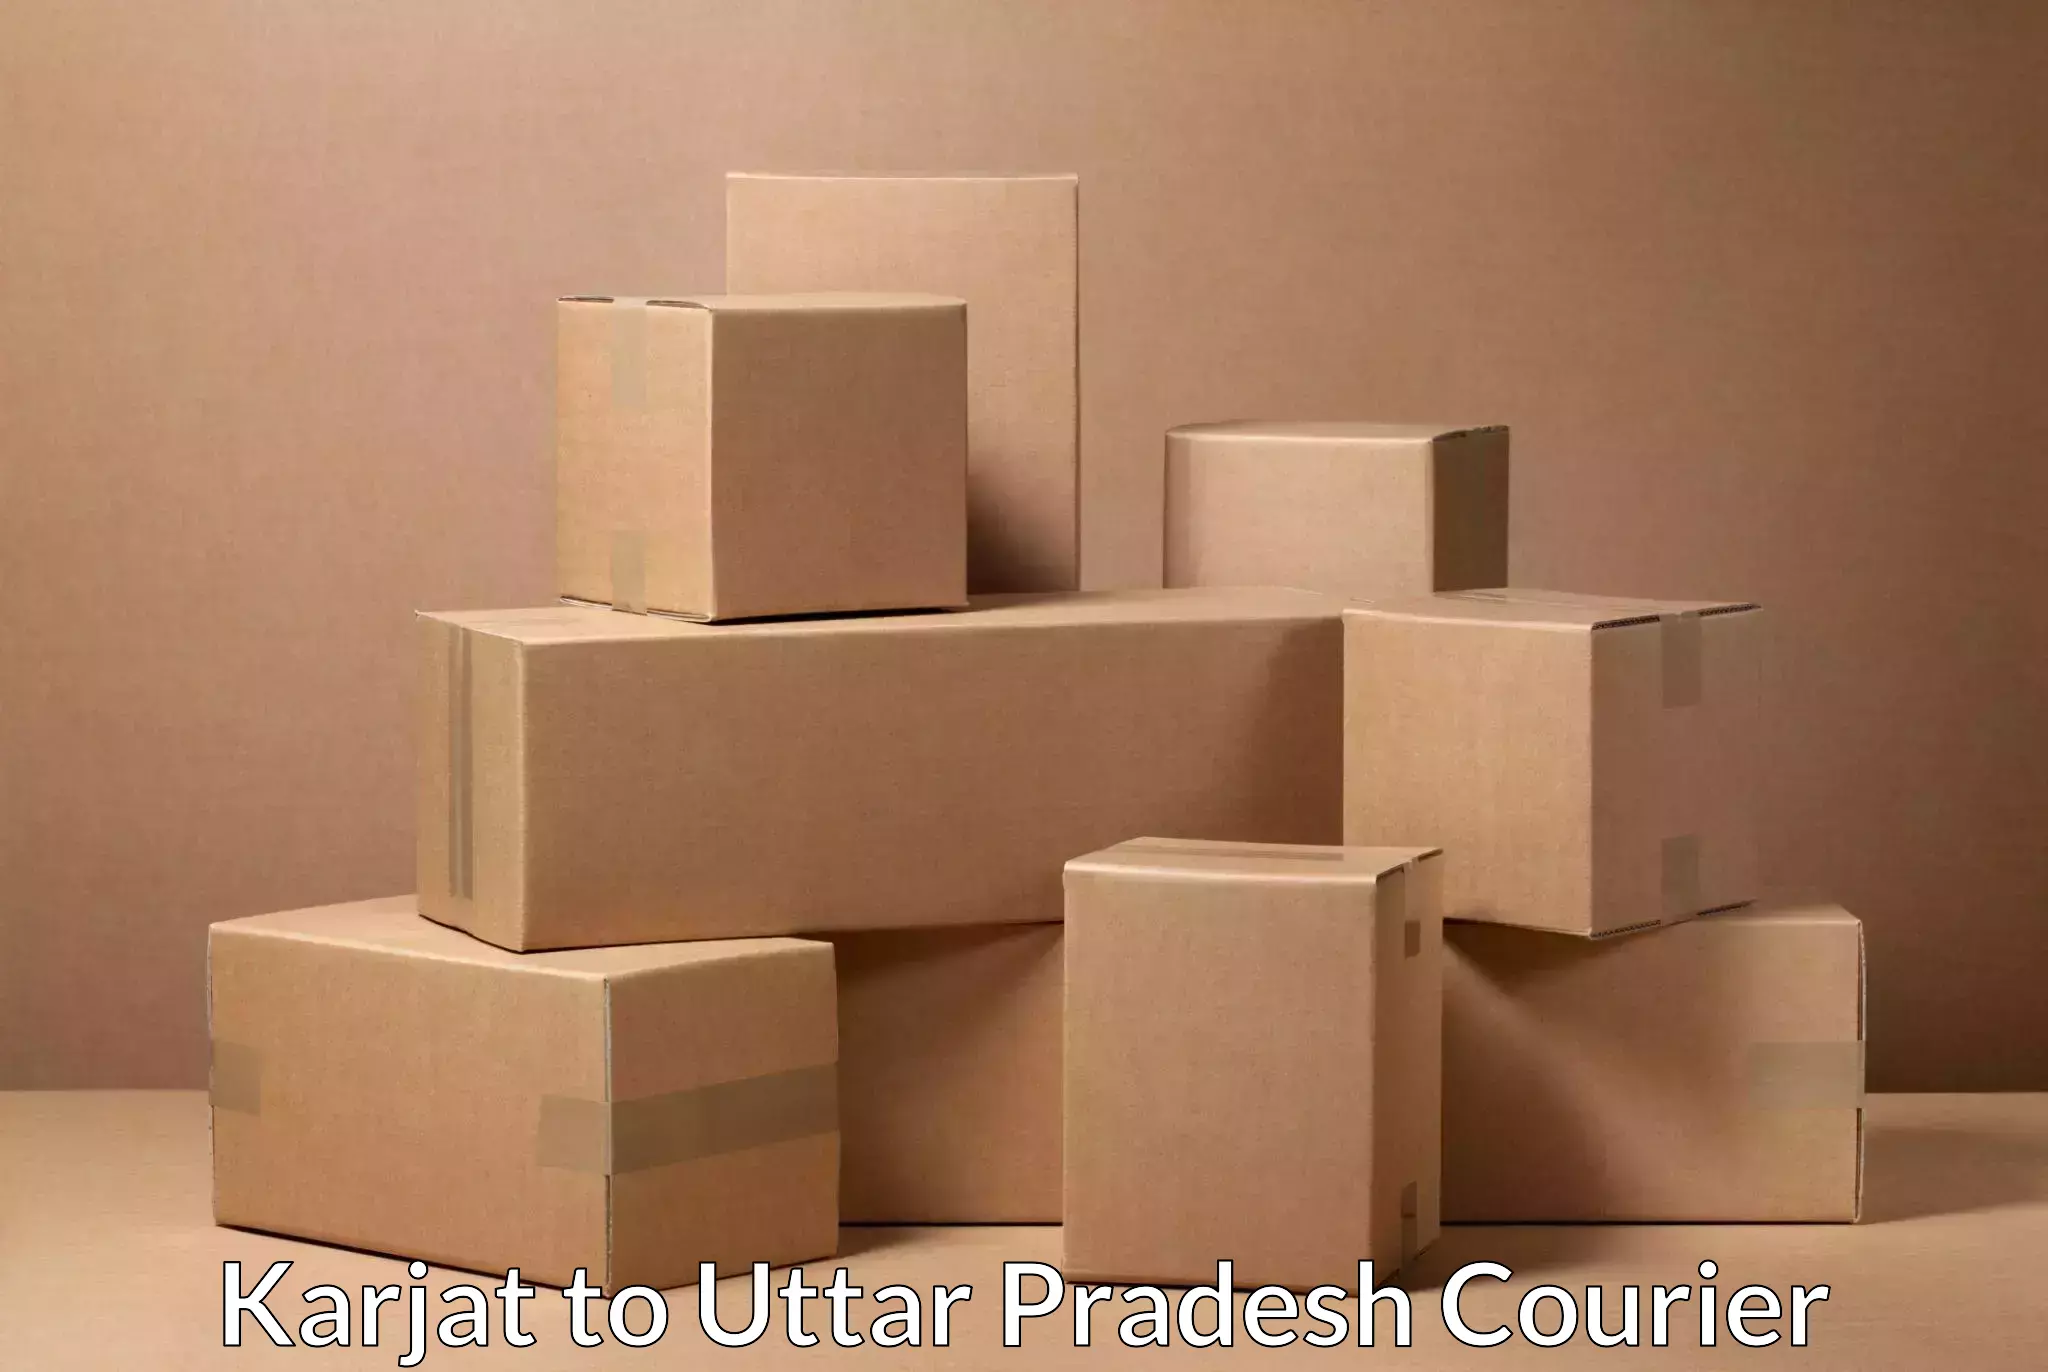 Dynamic courier operations in Karjat to Atrauli